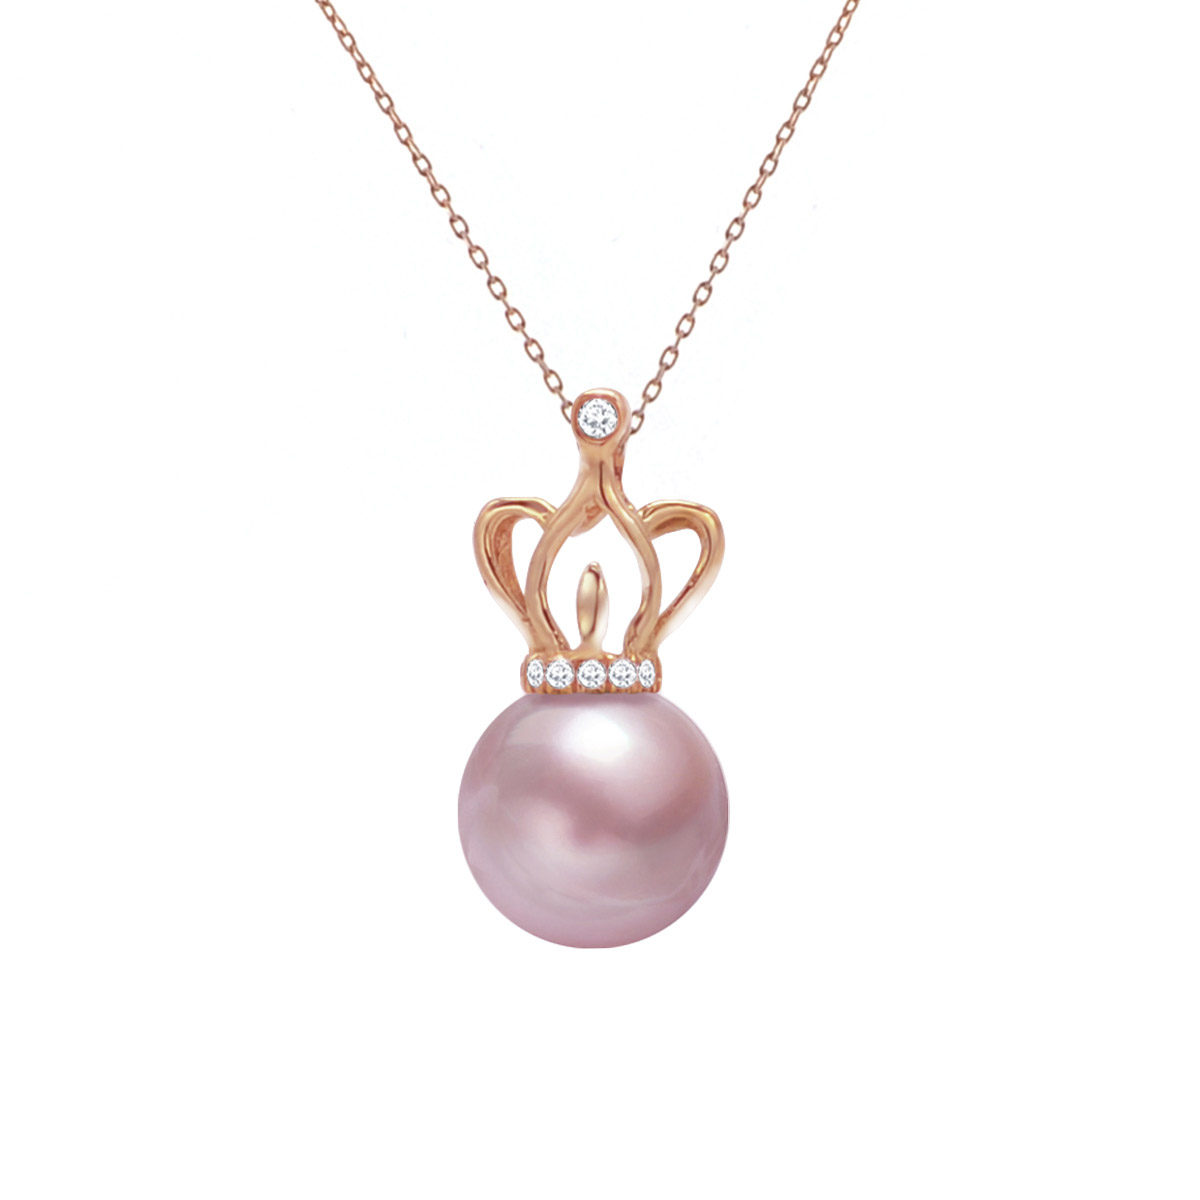 7-8mm Freshwater Pearl with diamond mounted 14K/585 Rose Gold Pendant